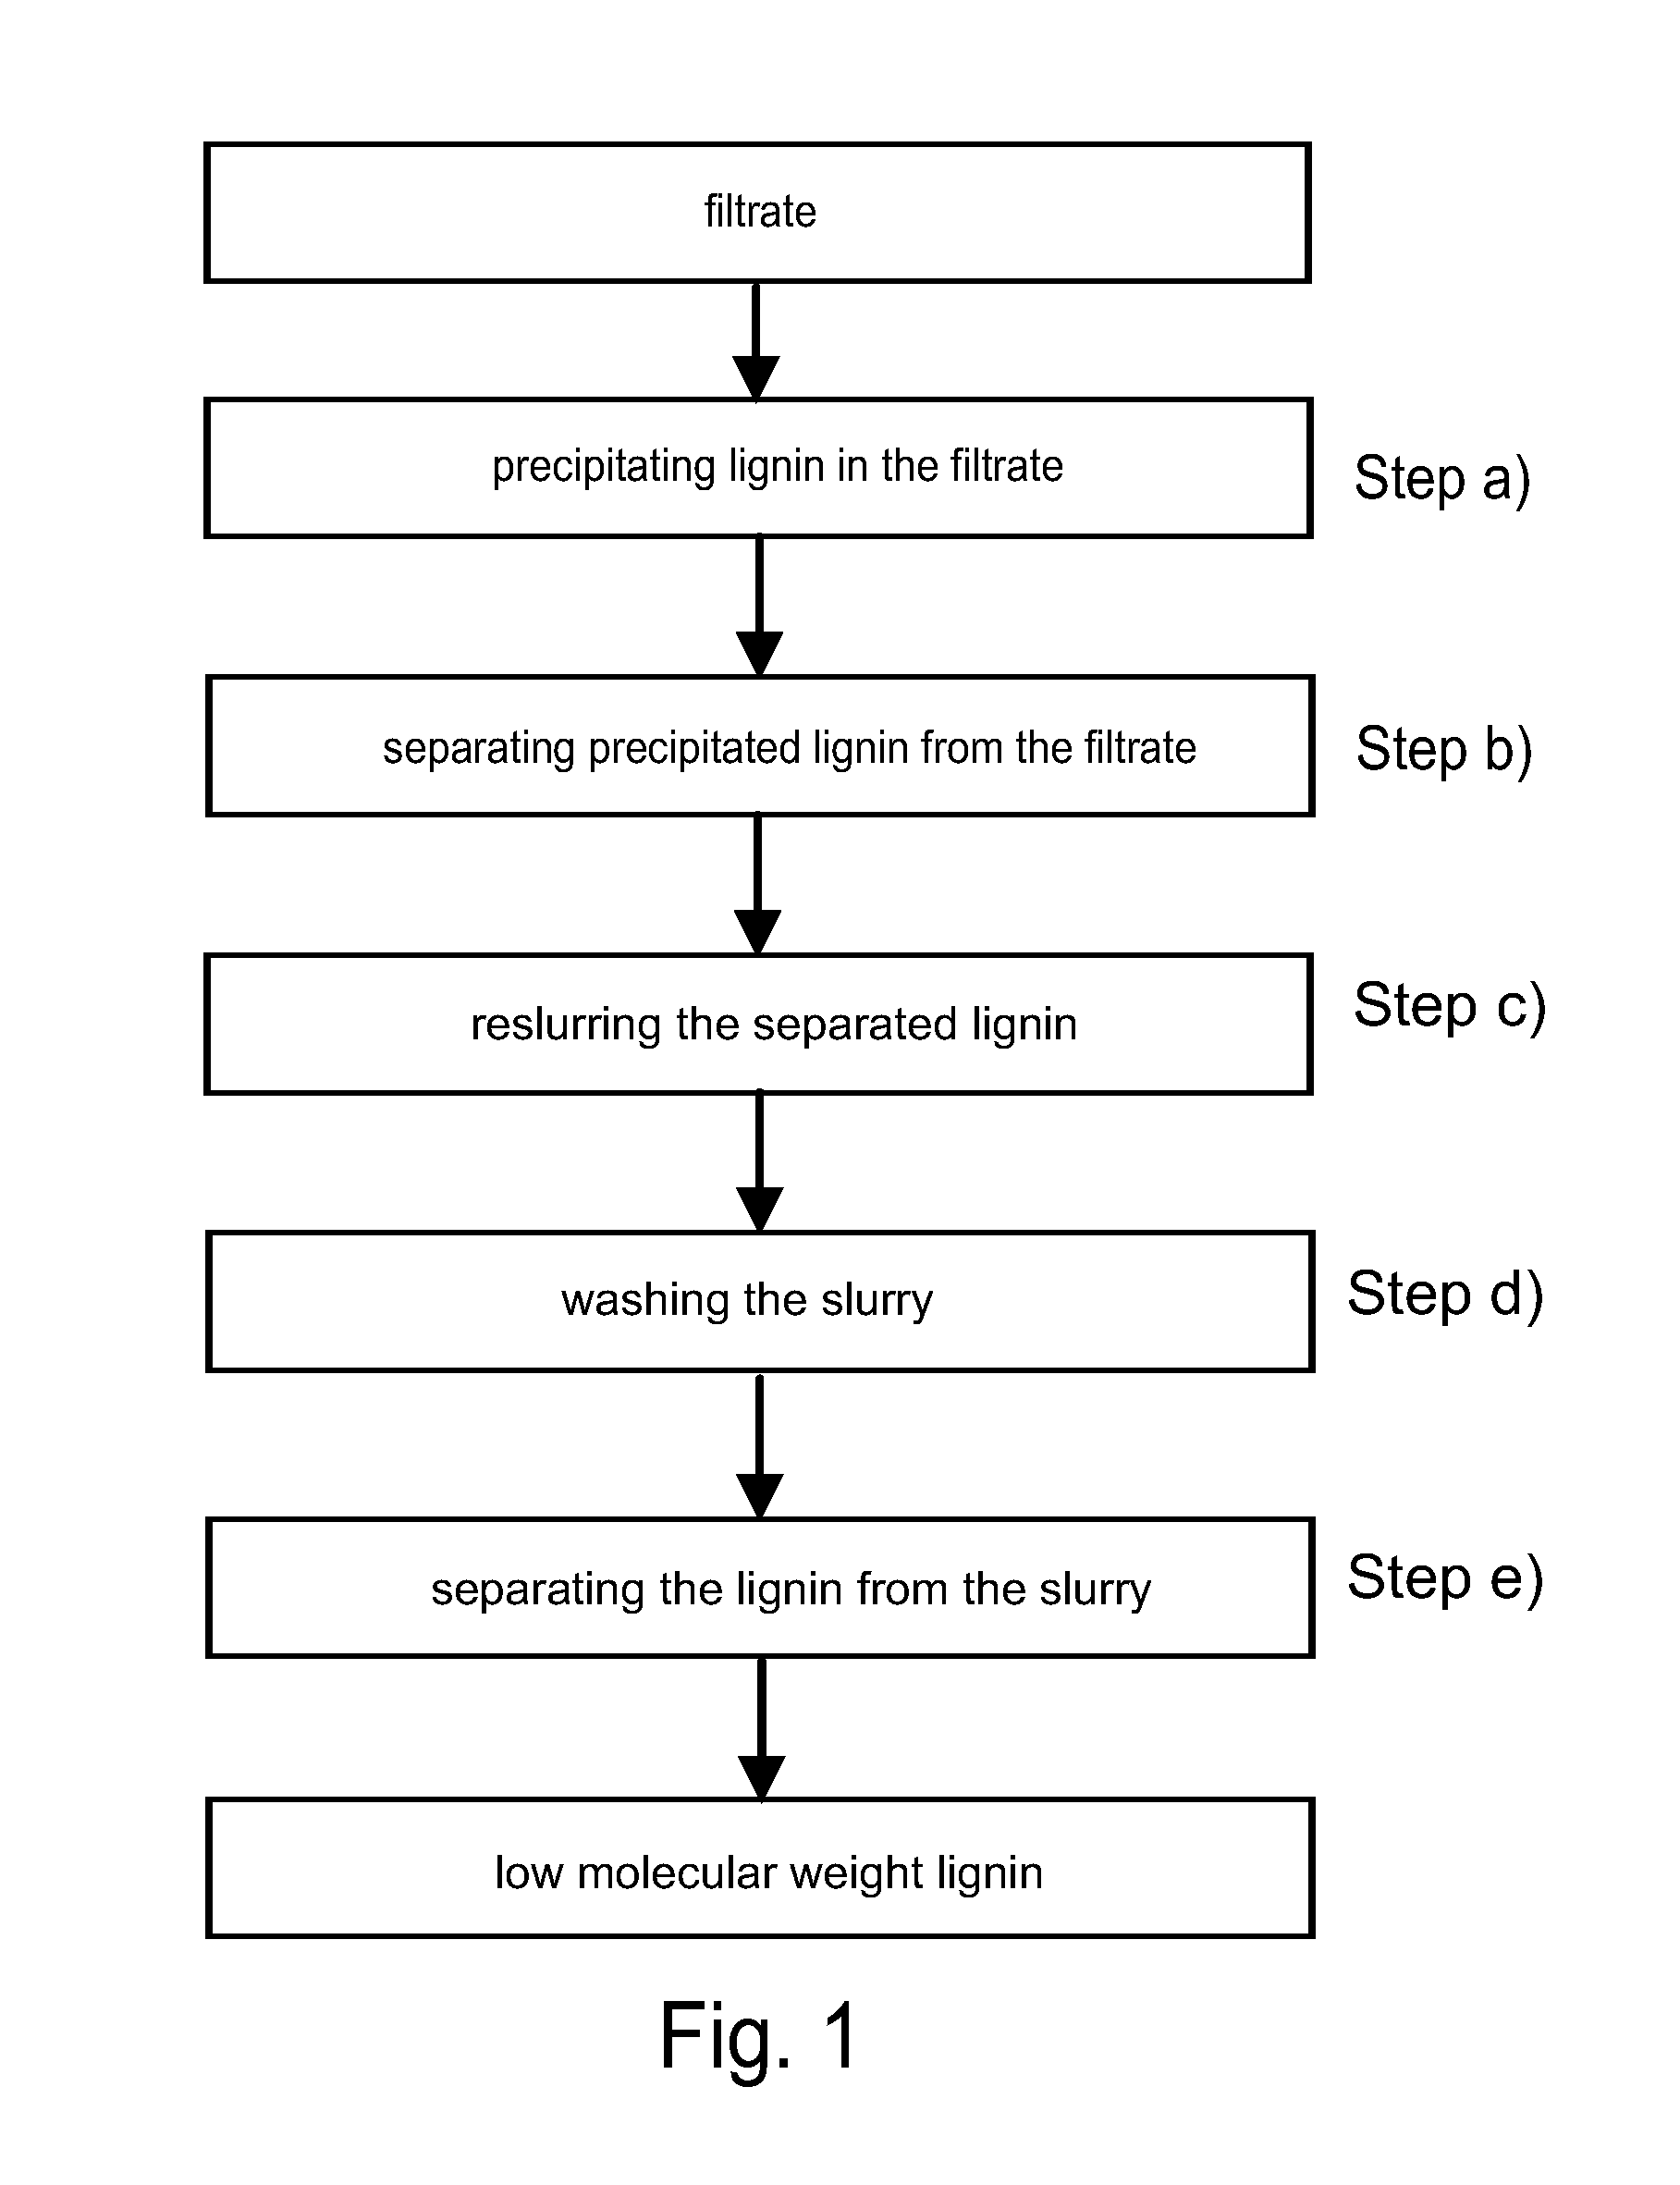 Method for recovering low molecular weight lignin from a filtrate